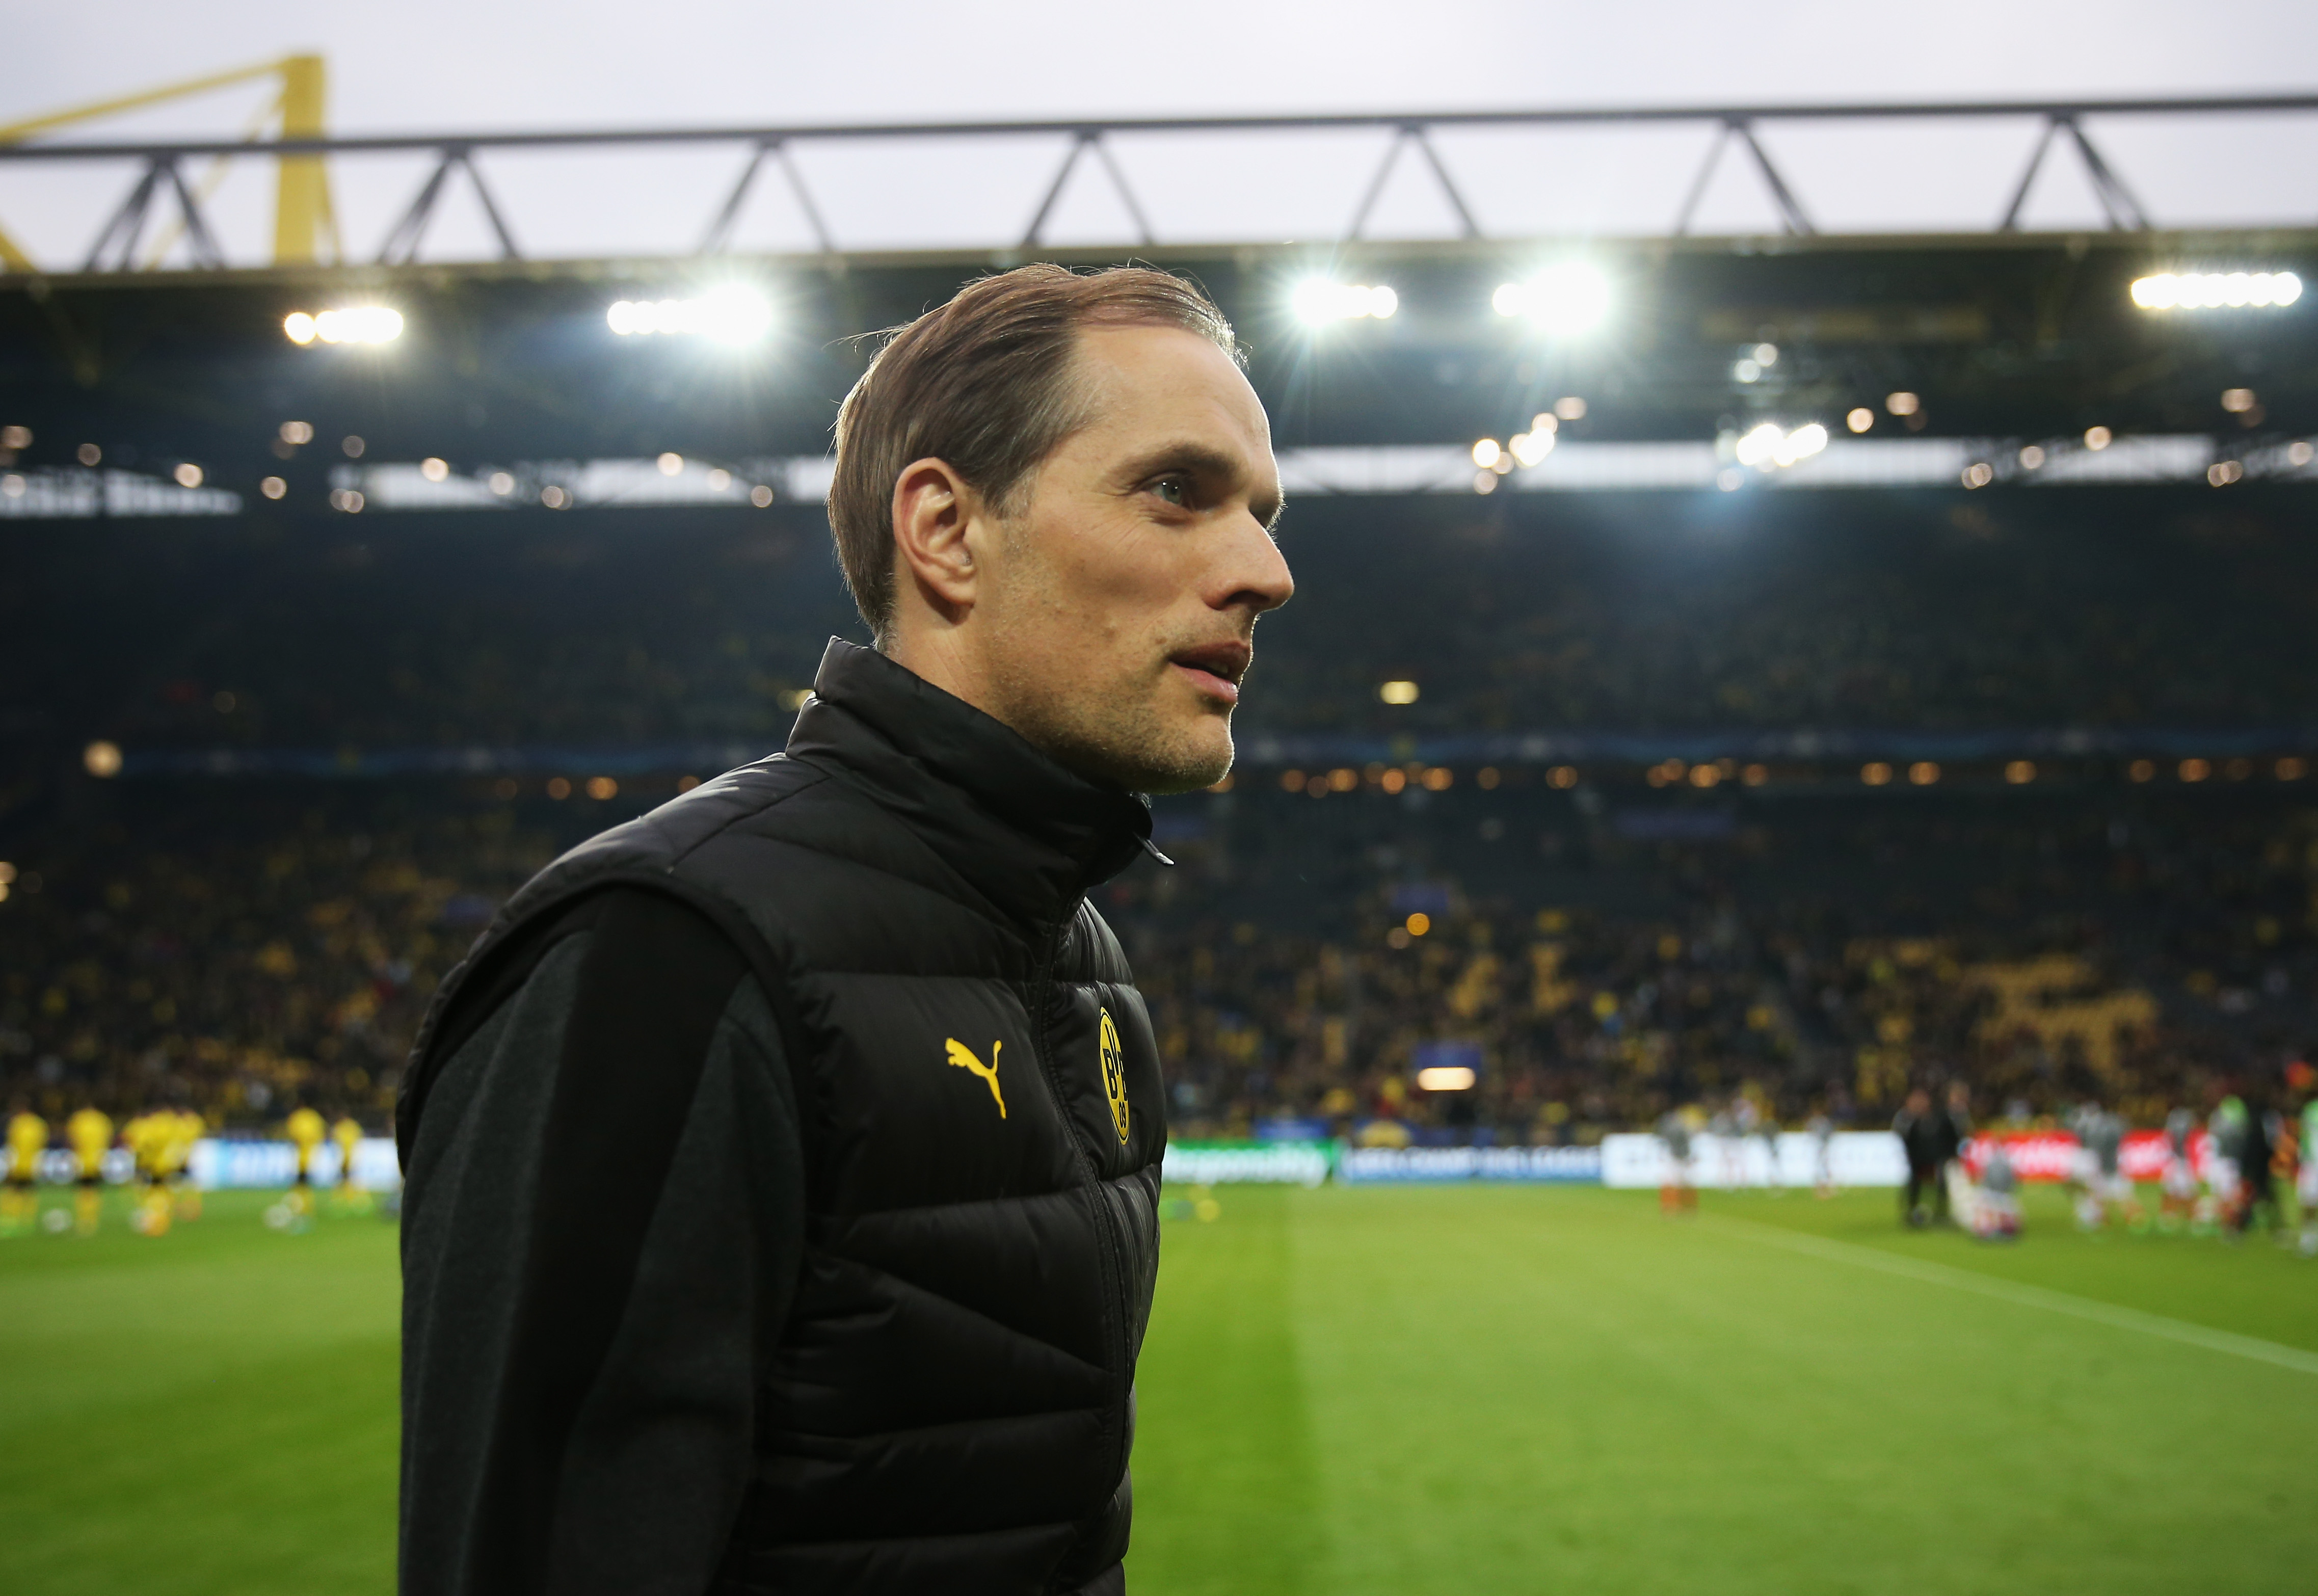 Can Thomas Tuchel be a good appointment for Manchester United? (Photo by Maja Hitij/Bongarts/Getty Images)